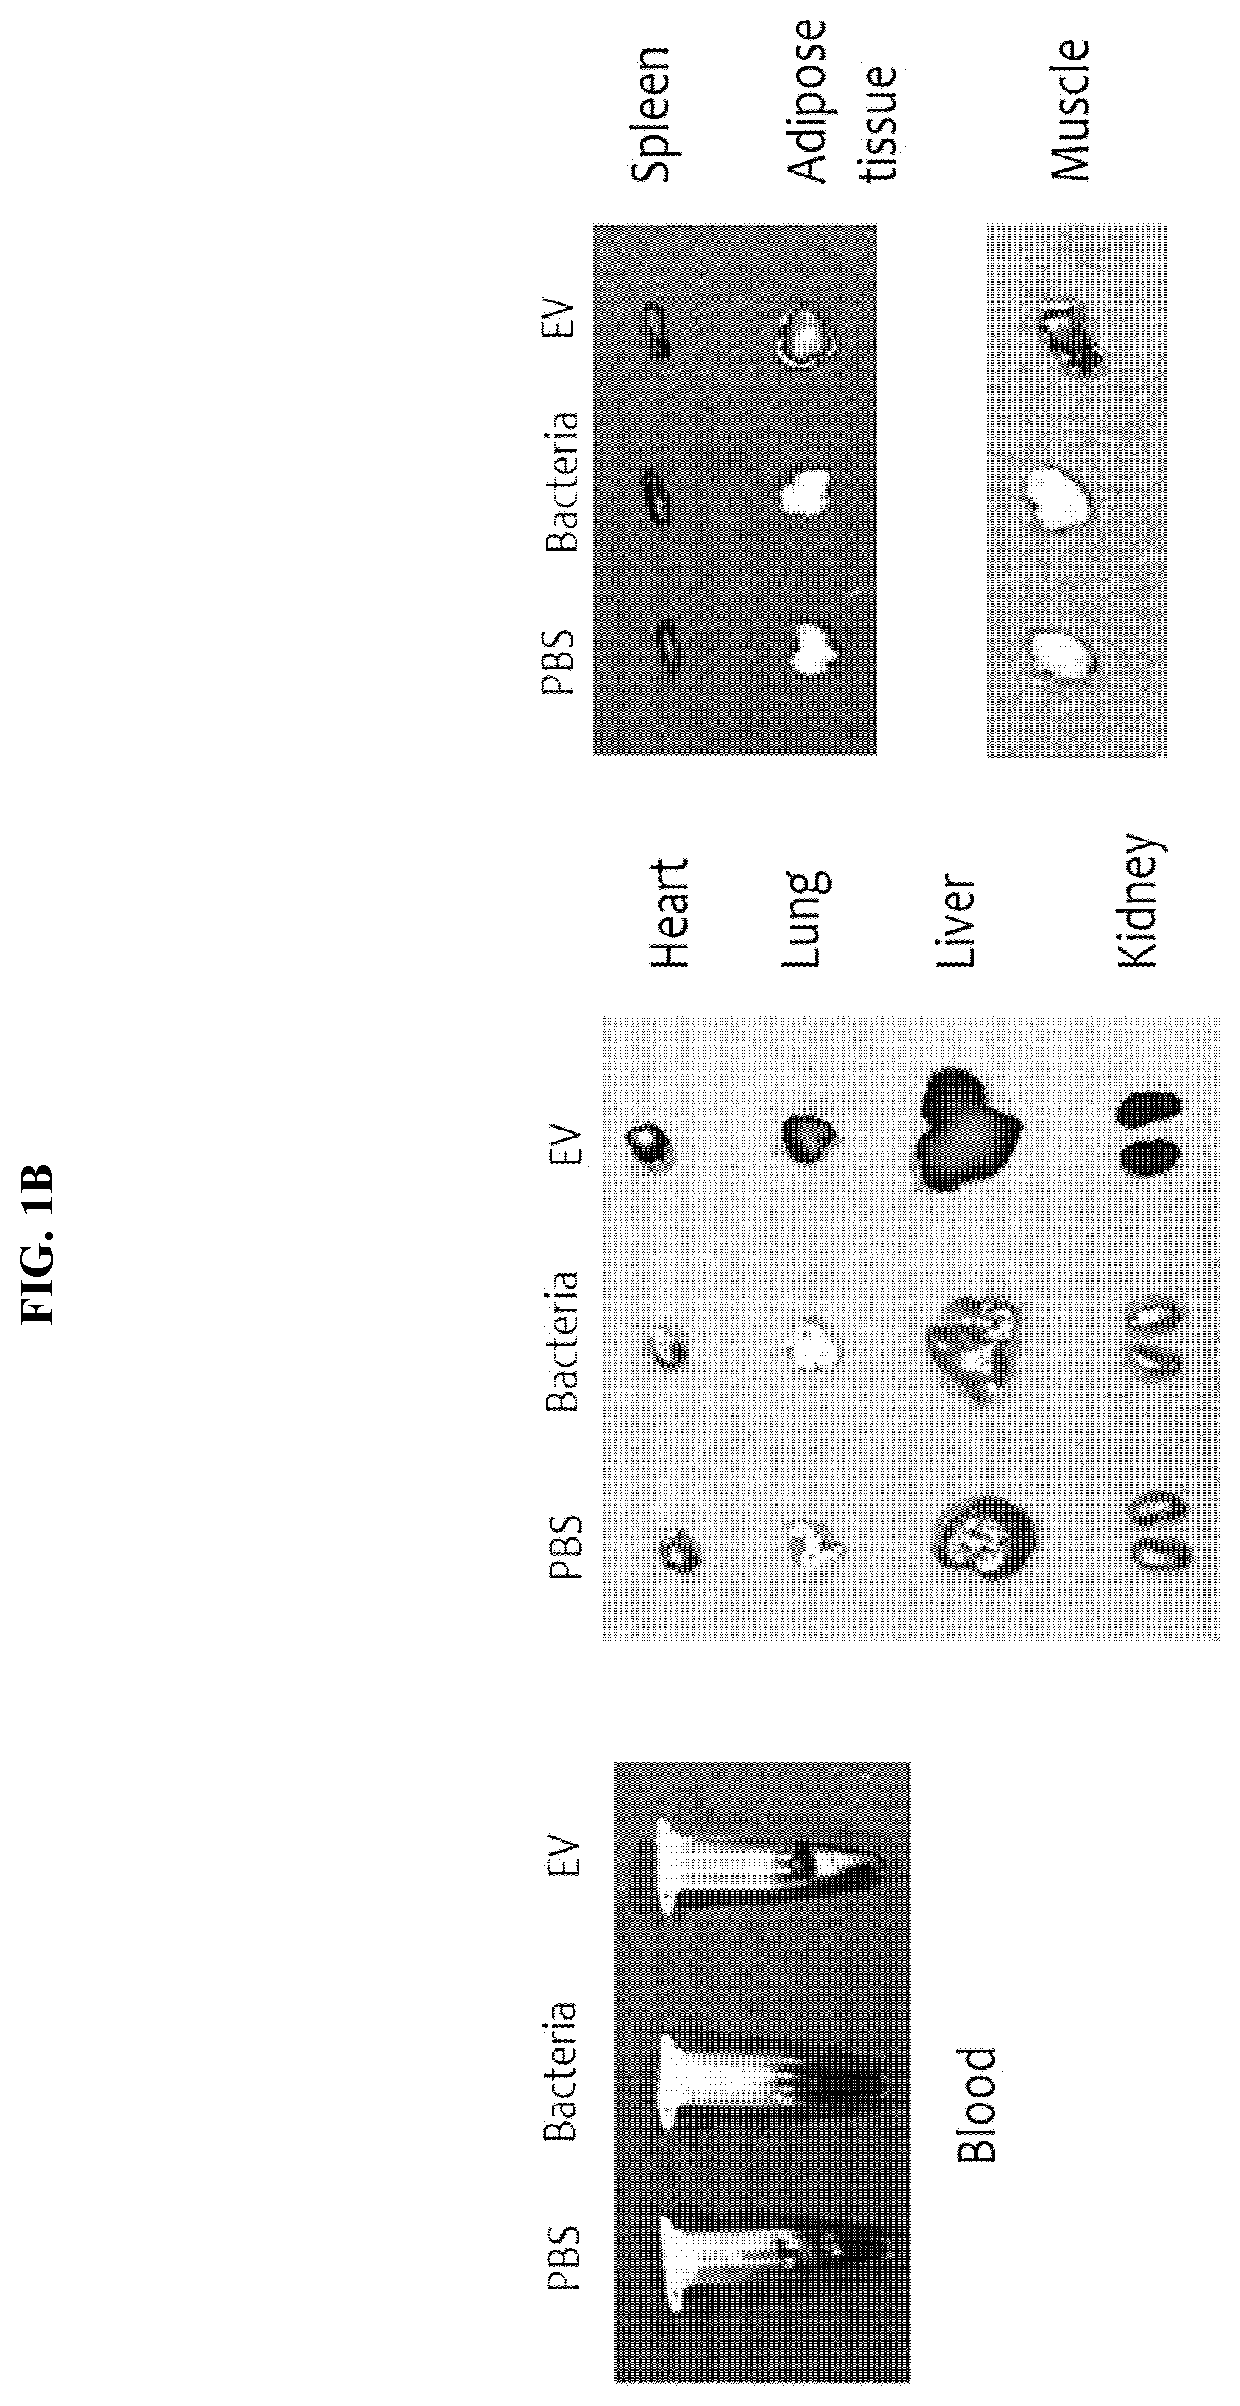 Nanovesicles derived from faecalibacterium prausnitzii and uses thereof